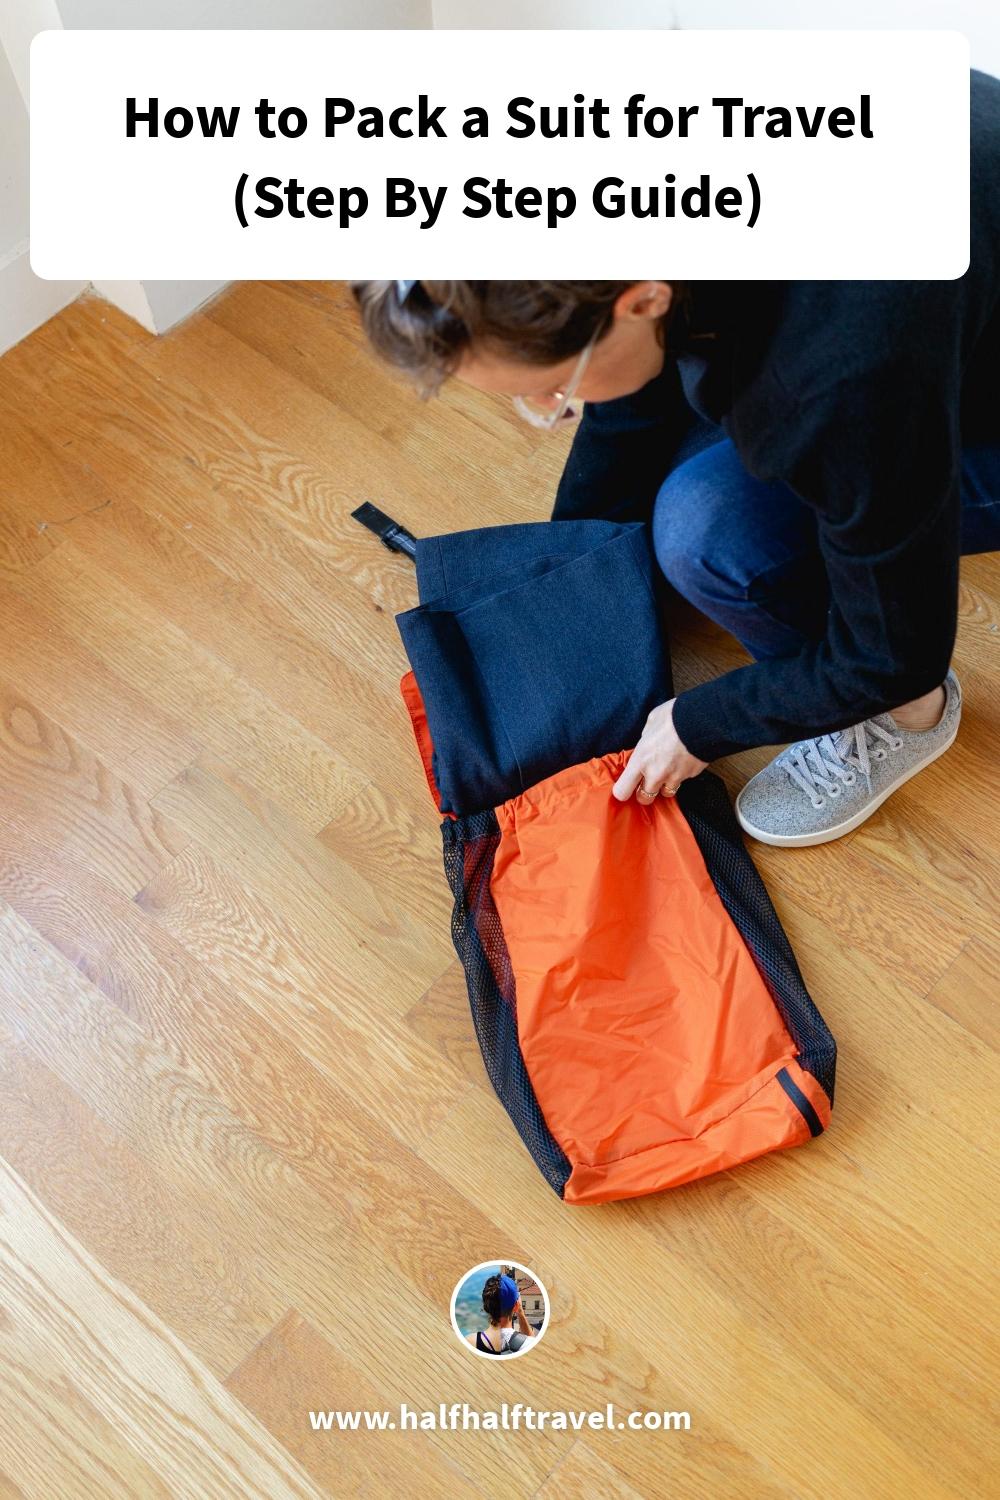 Pinterest image from the 'How to pack a suit for travel (Step By Step Guide)' article on Half Half Travel